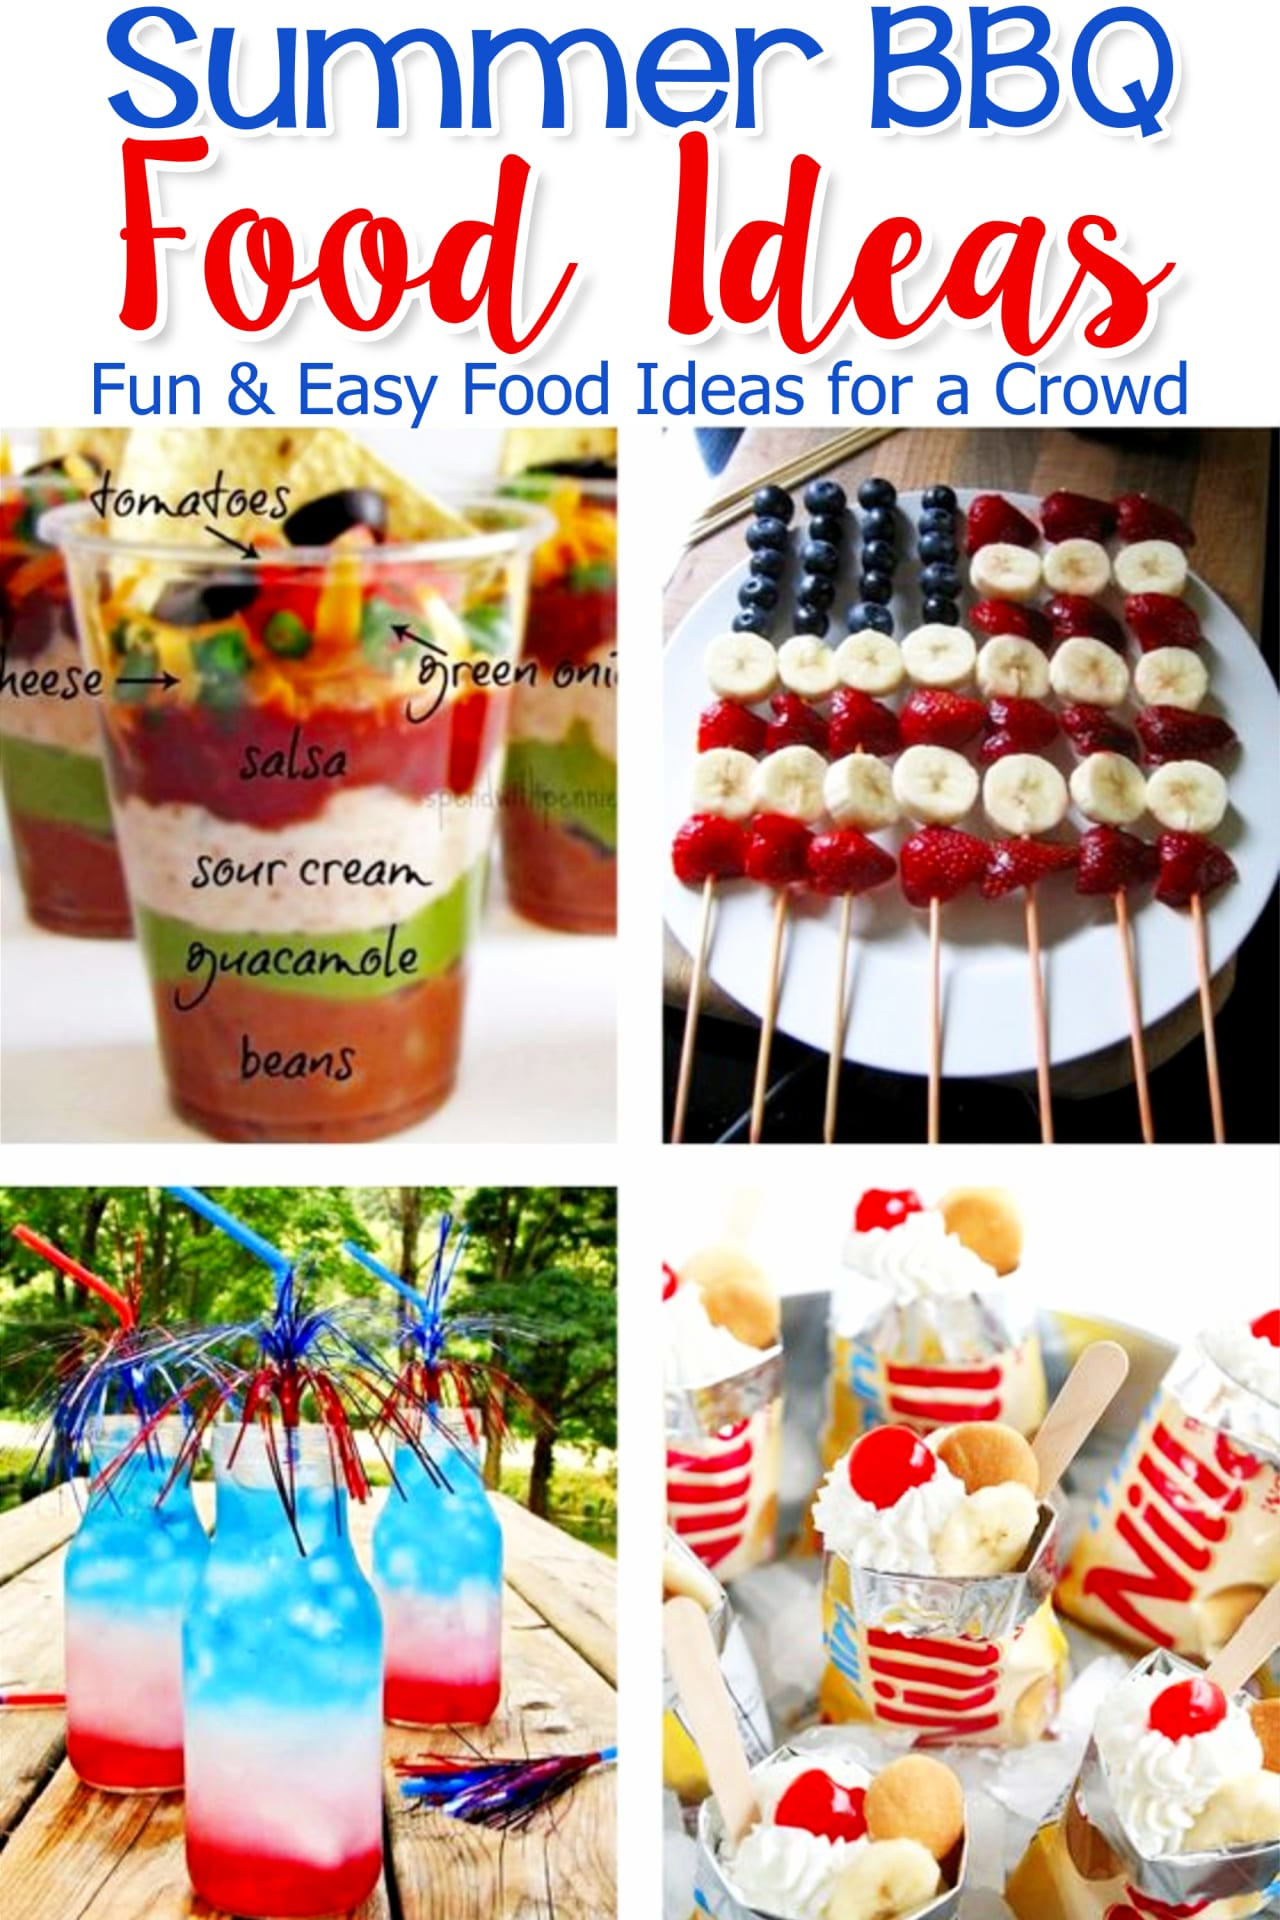 Summer Bbq Party Food Ideas
 Food Ideas for a BBQ Party EASY Summer Cookout Foods We Love